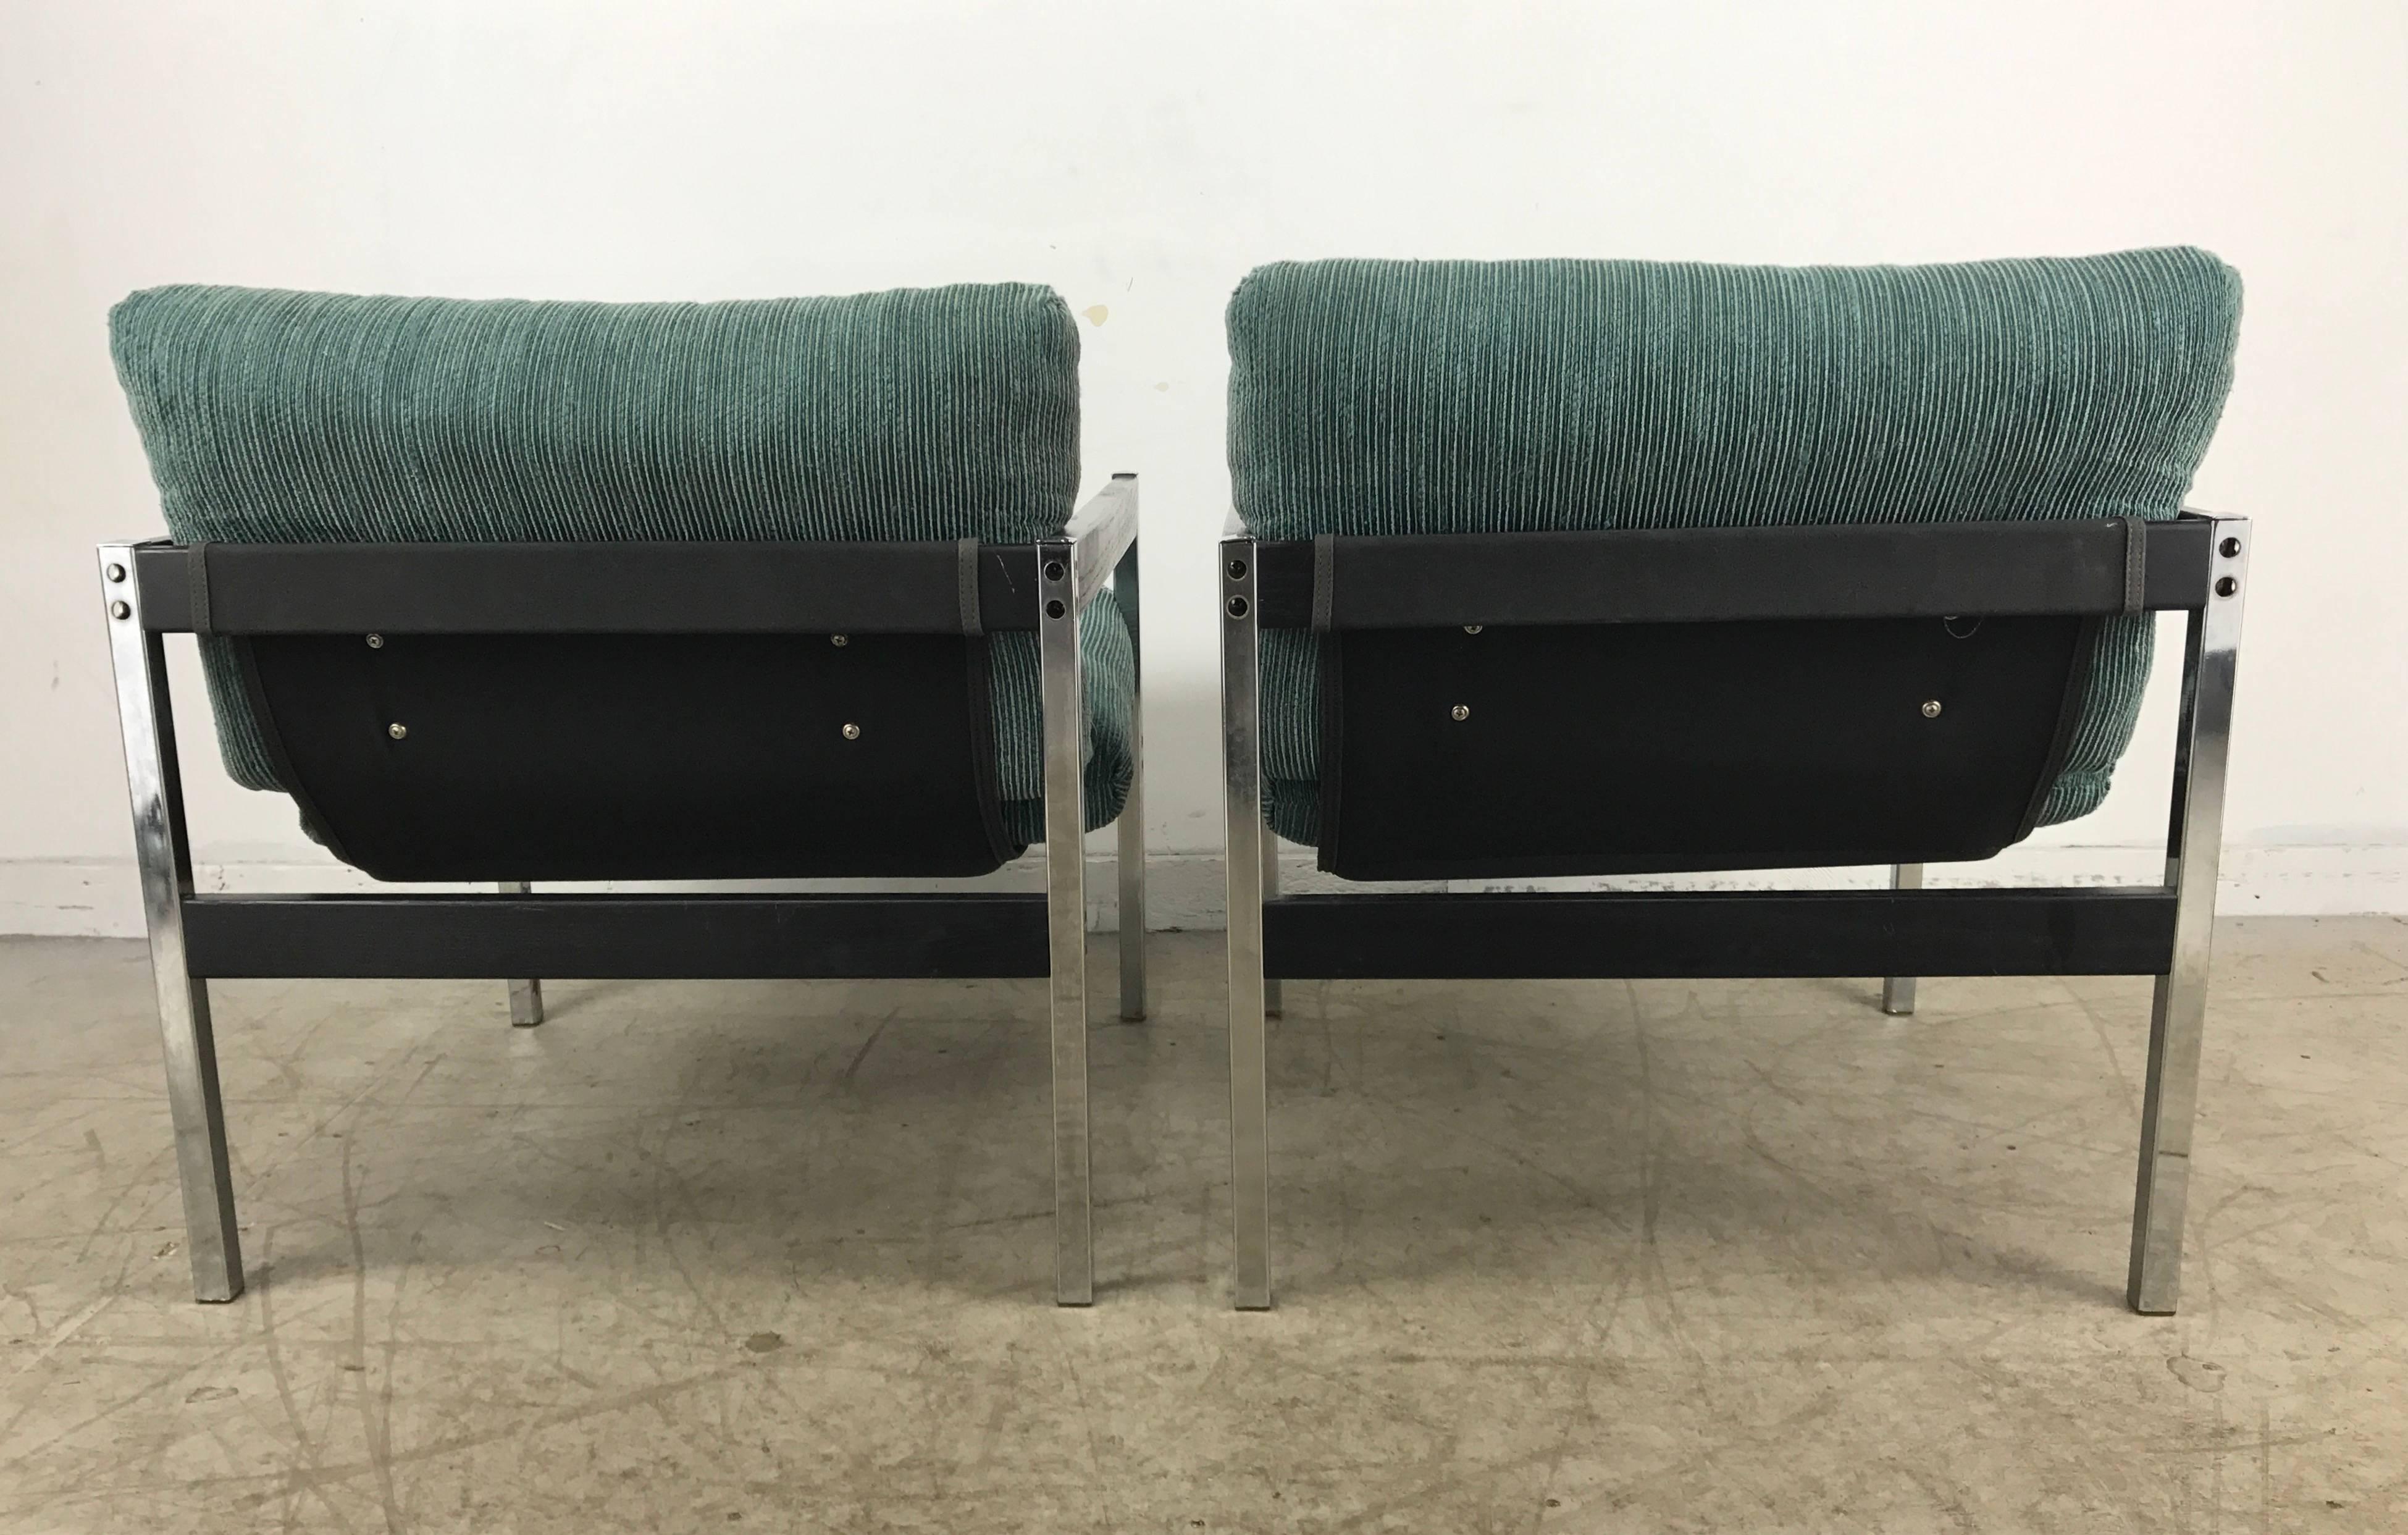 20th Century Pair of Modernist Chrome and Wood Sling Lounge Chairs after Charles Pollock